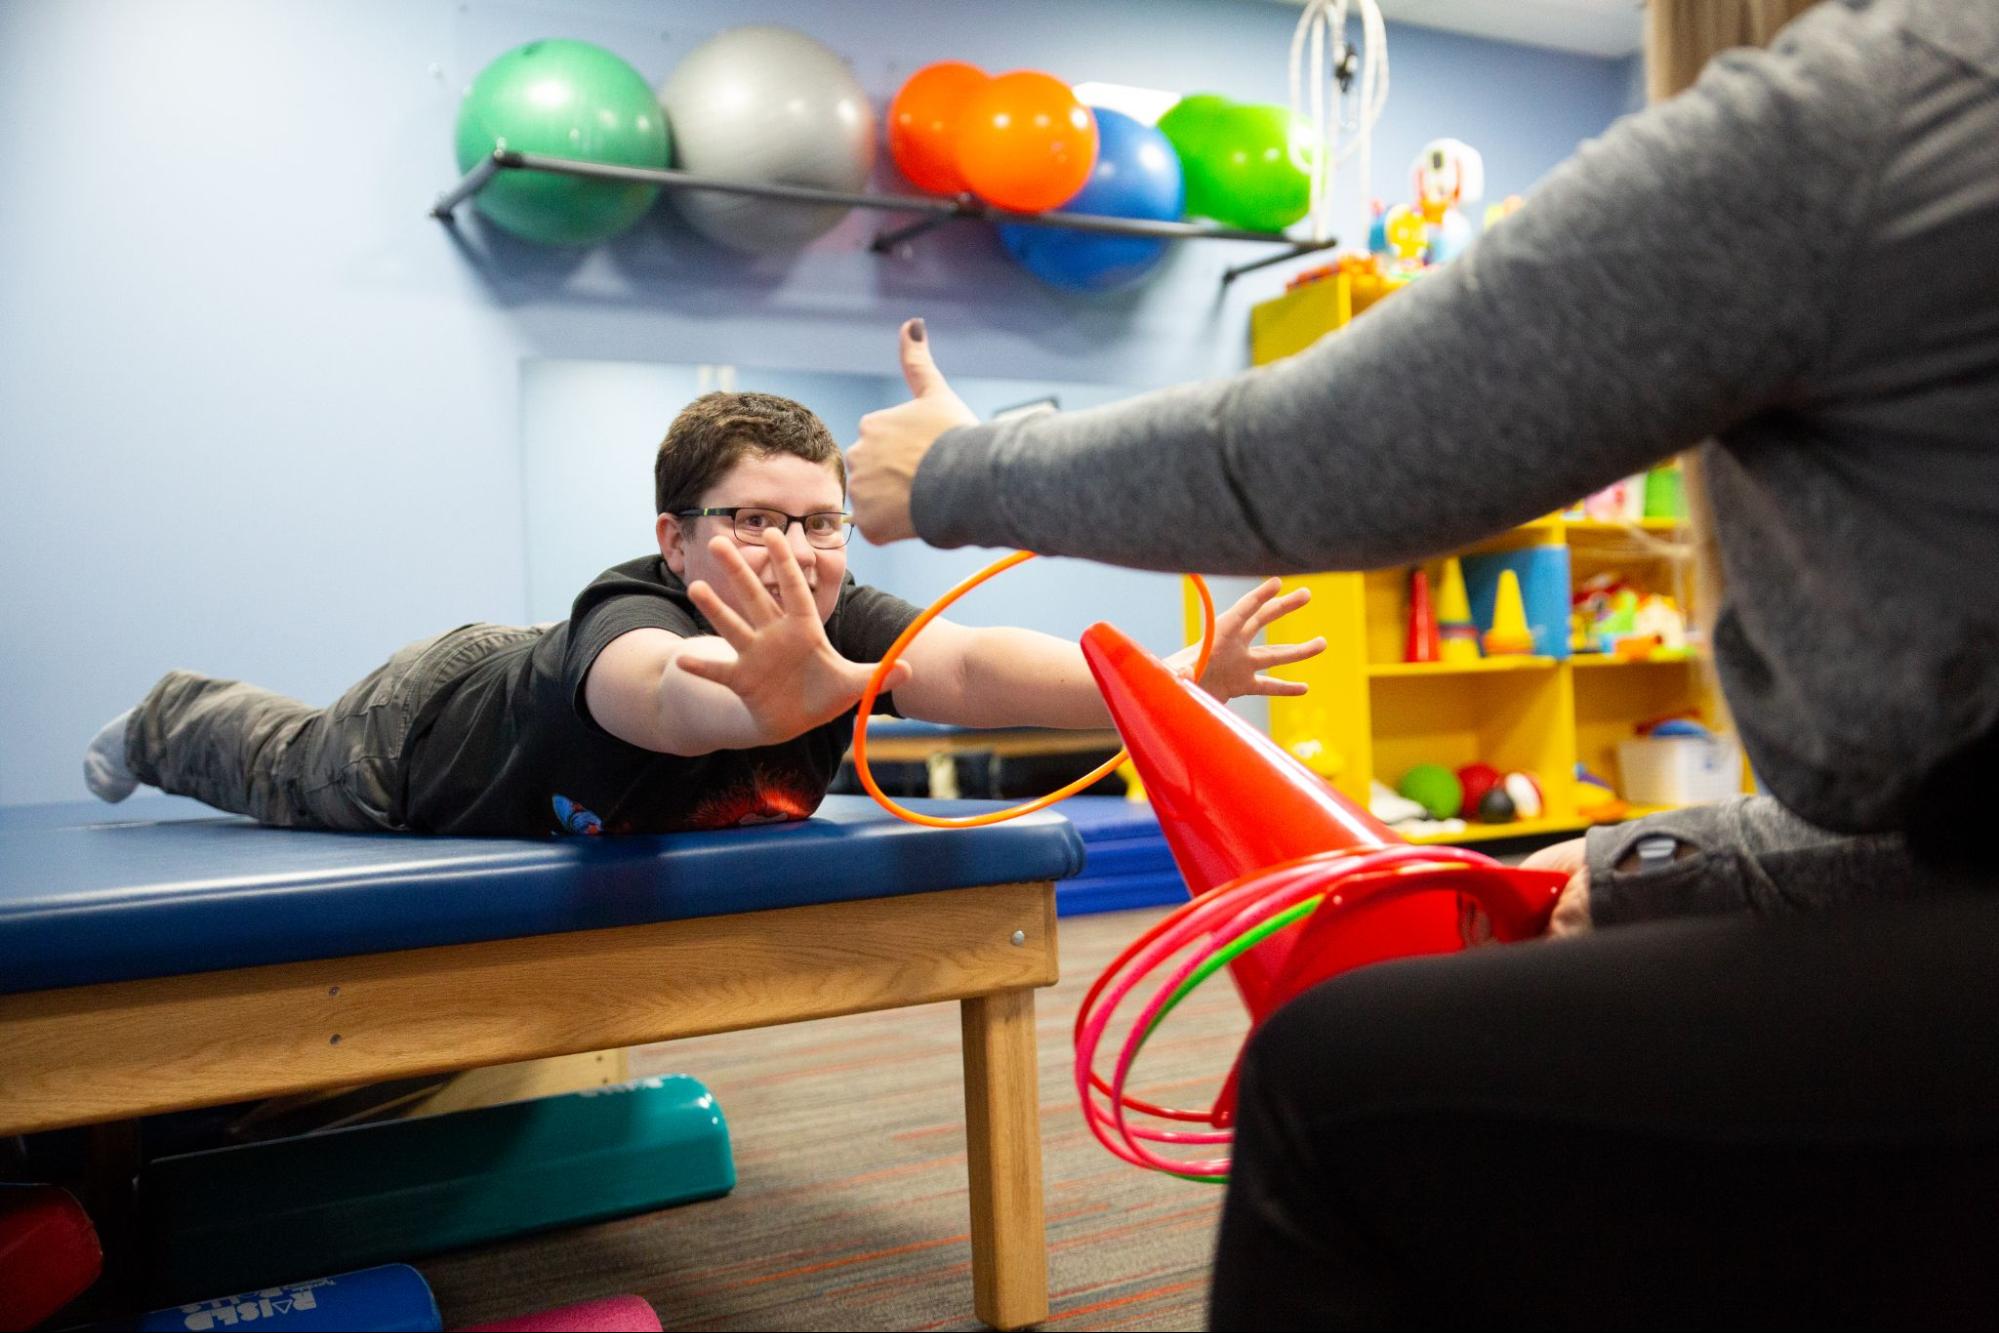 westside children's therapy picture from a kids' physical therapy session in illinois